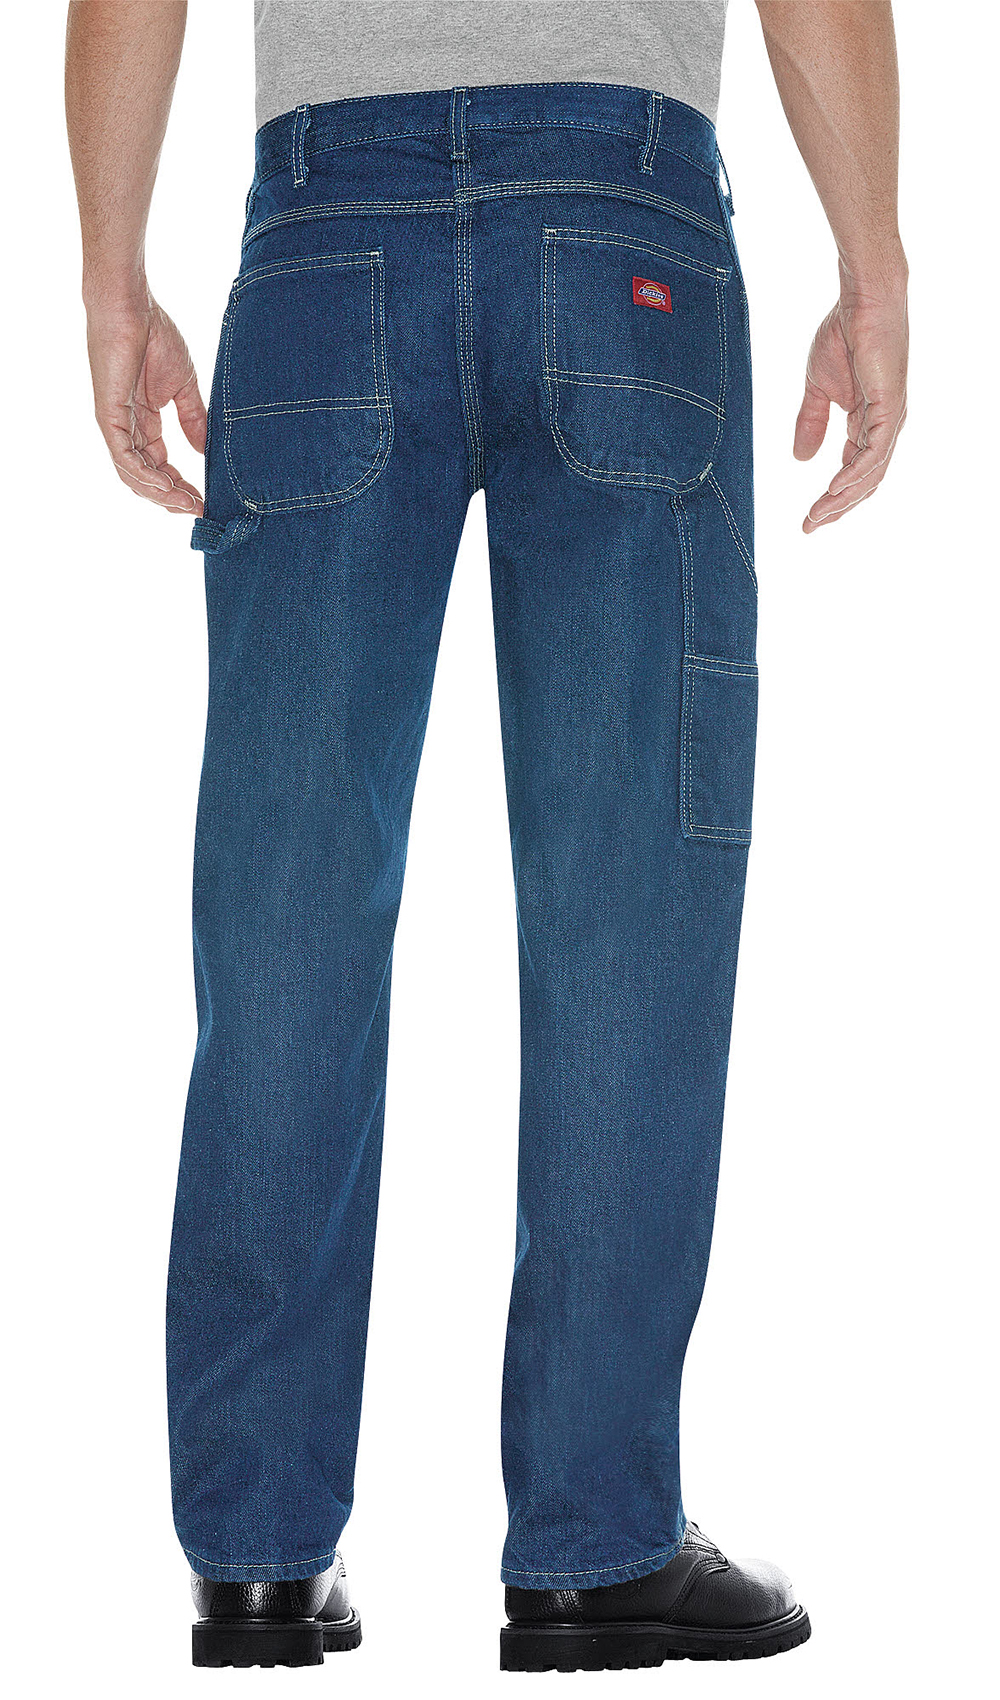 Mens Dickies Relaxed Fit Carpenter Jeans